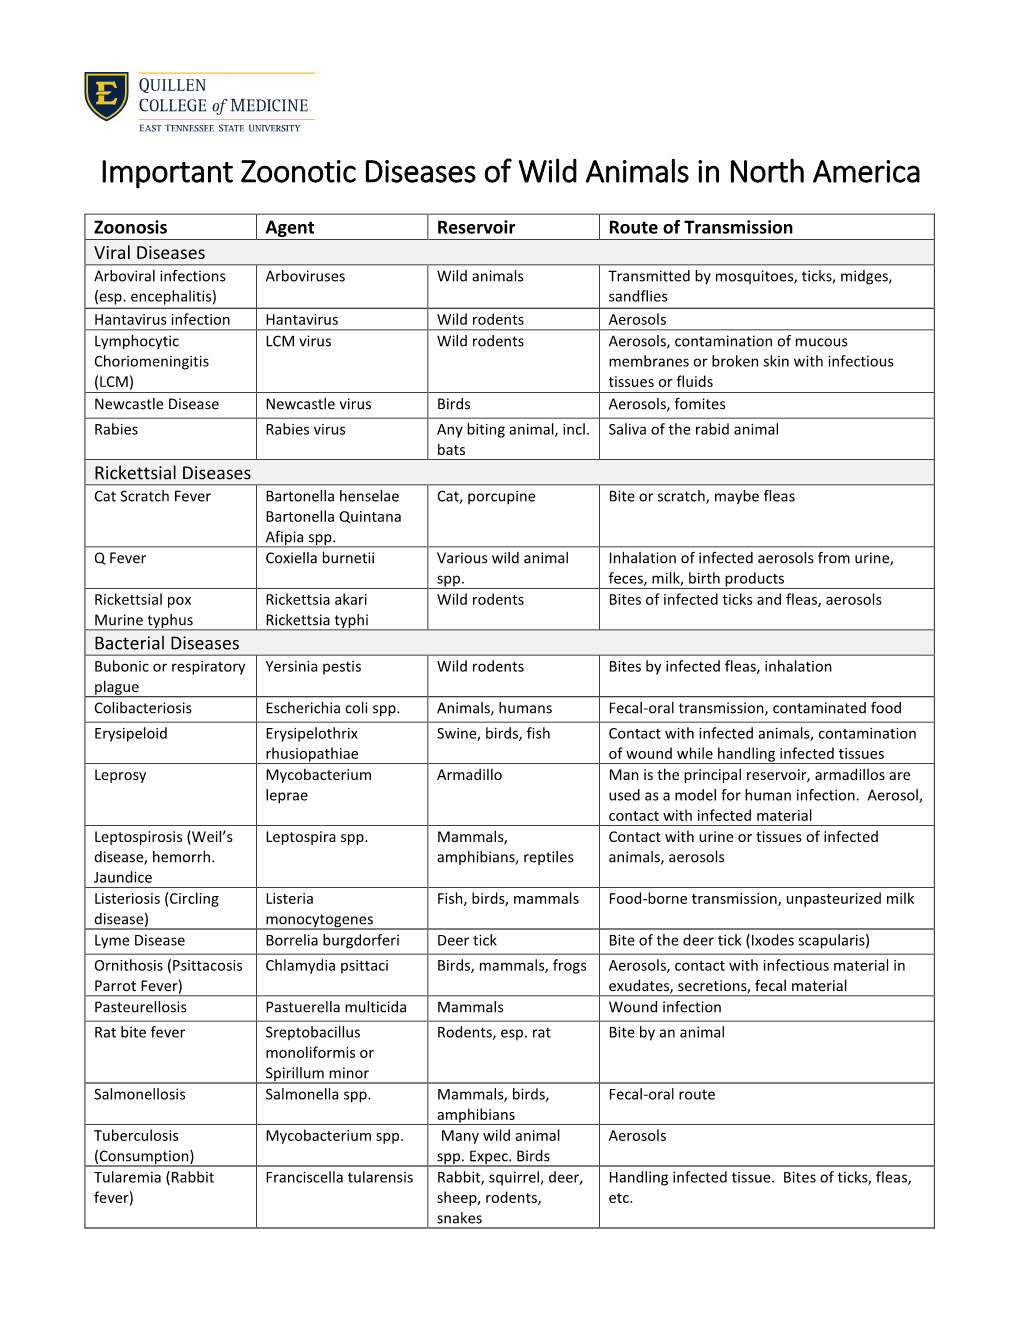 Zoonotic Diseases of Wild Animals in North America